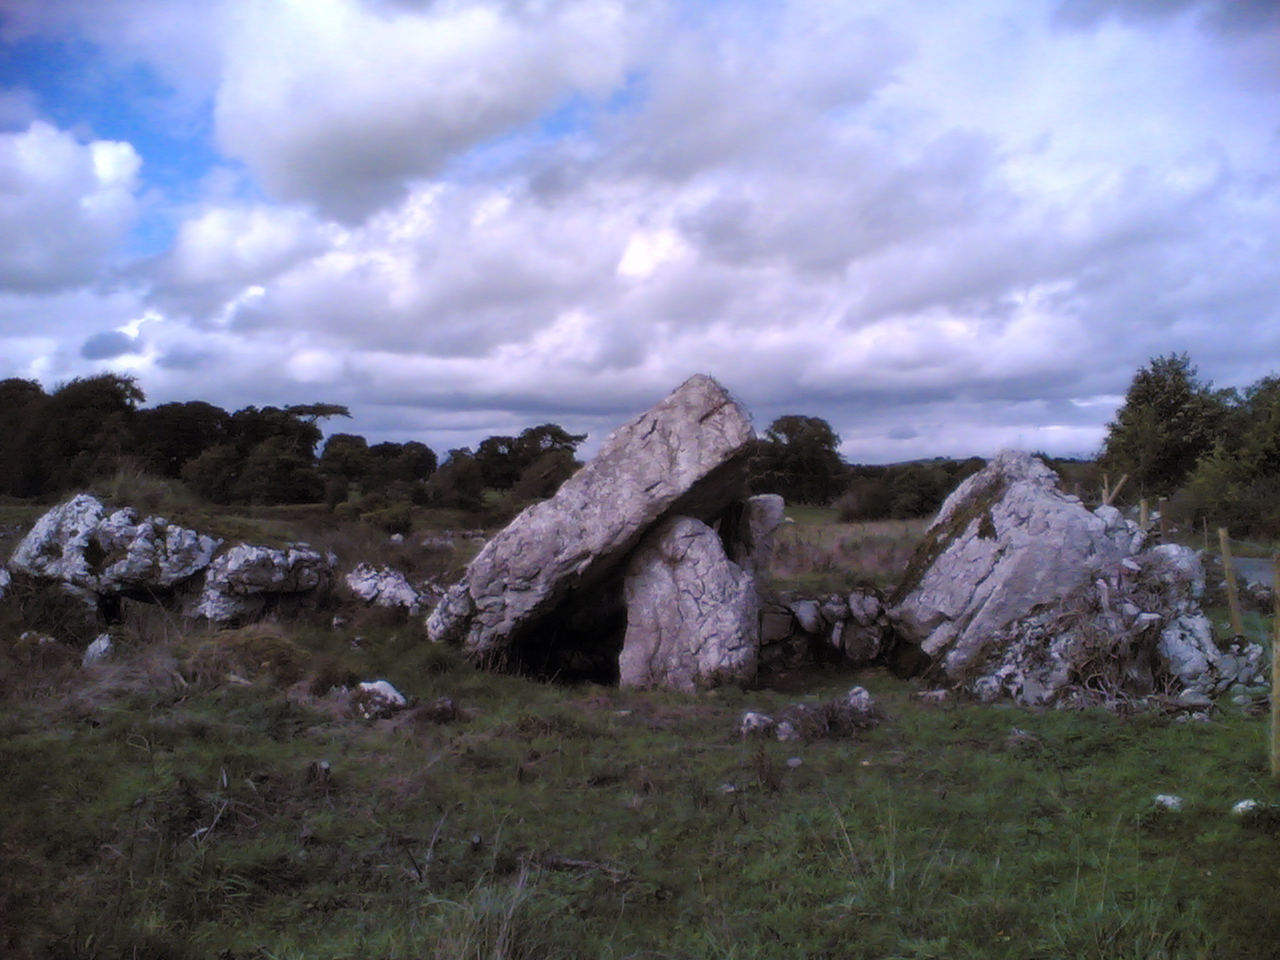 Discovering “The Stones”: Lecarrow, Co Roscommon